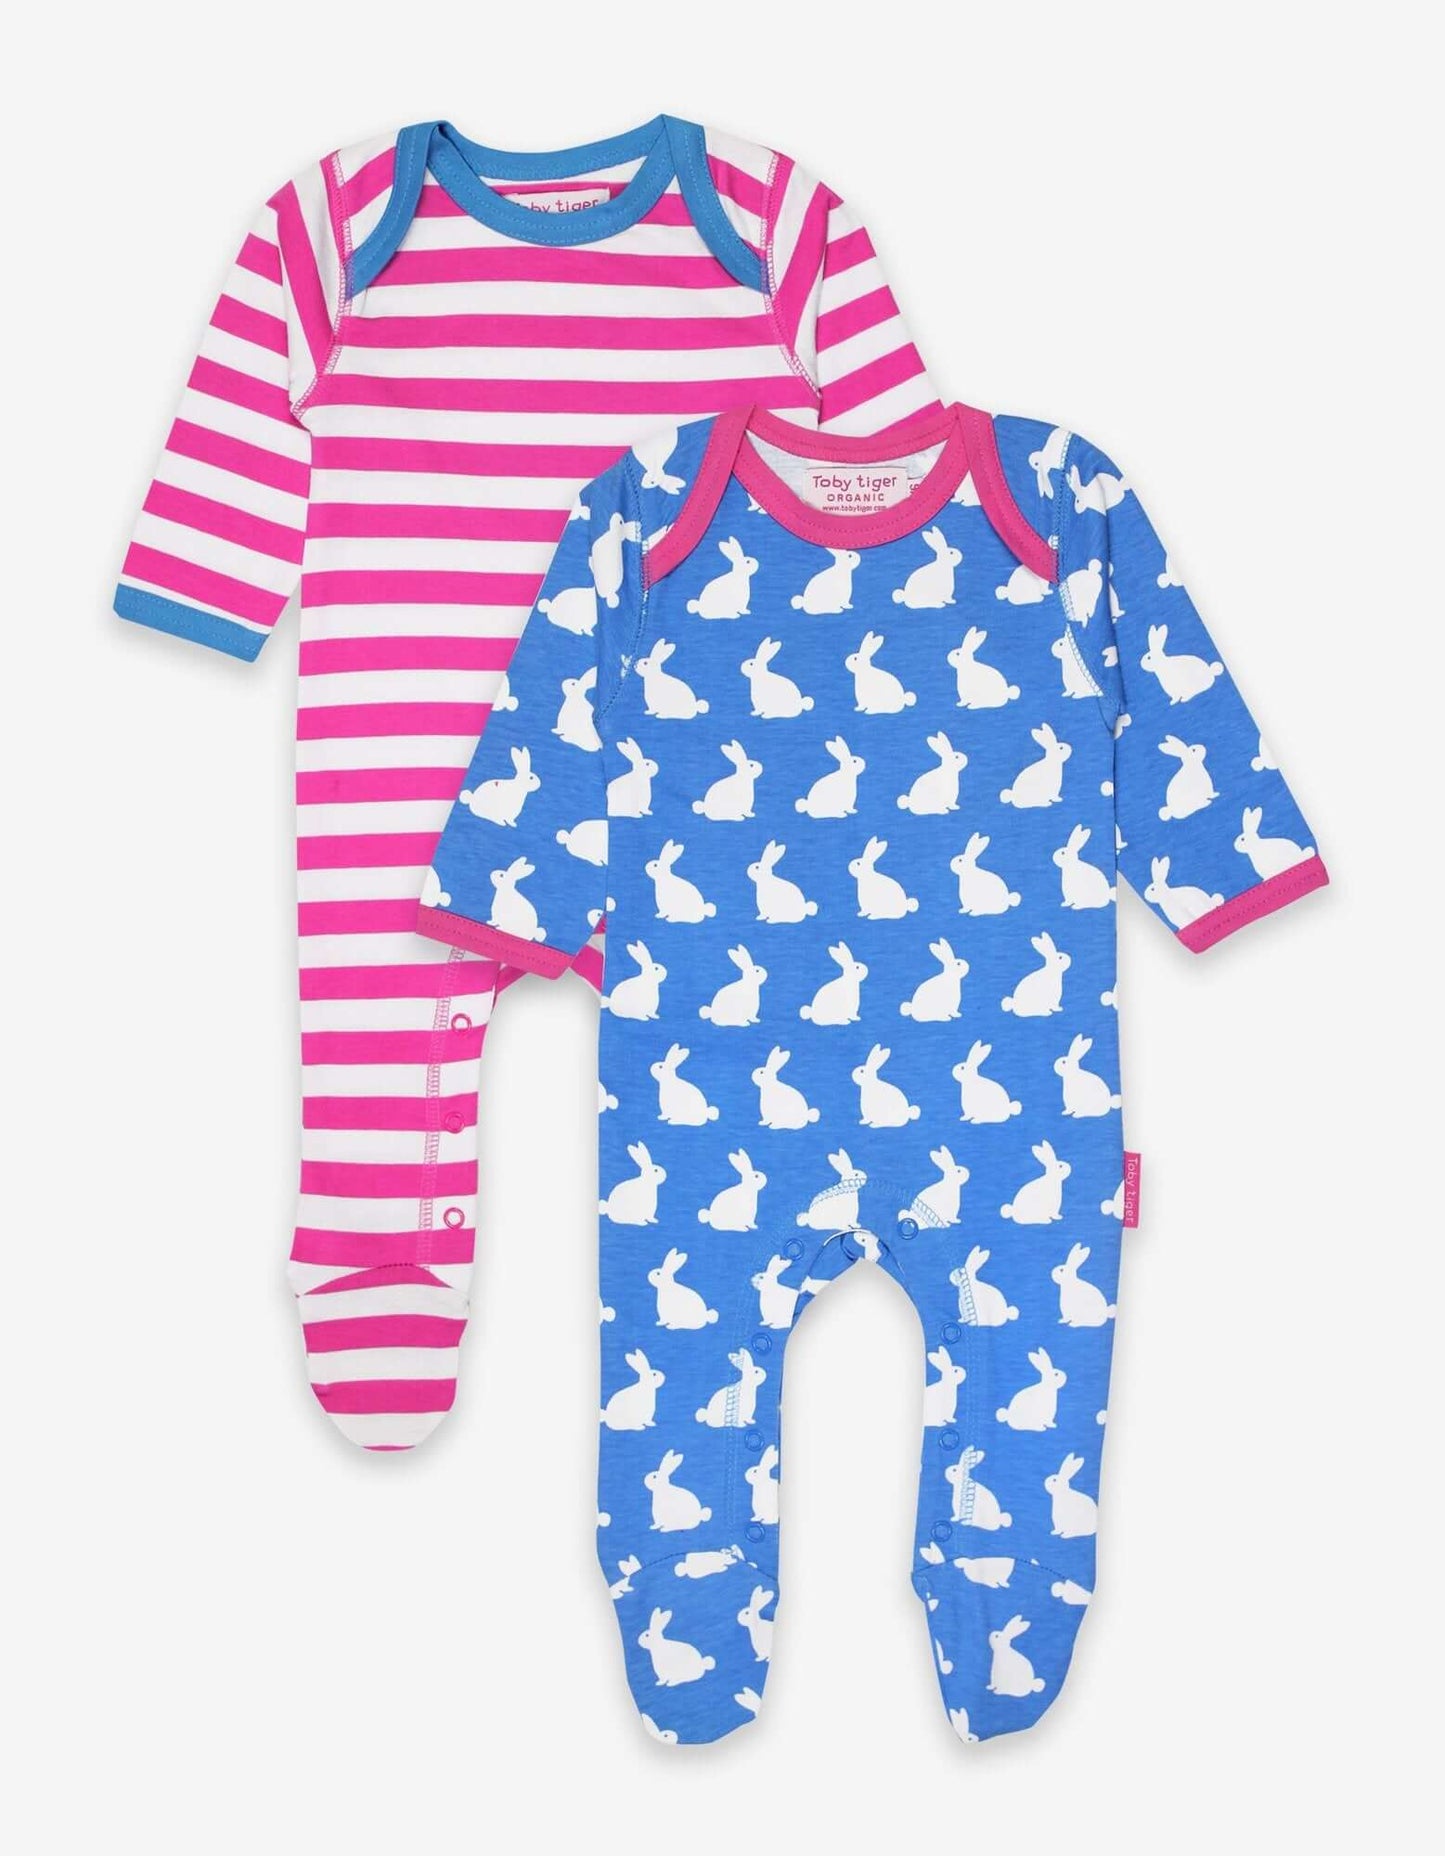 Toby Tiger Organic Bunny Print 2-Pack Sleepsuit with Feet